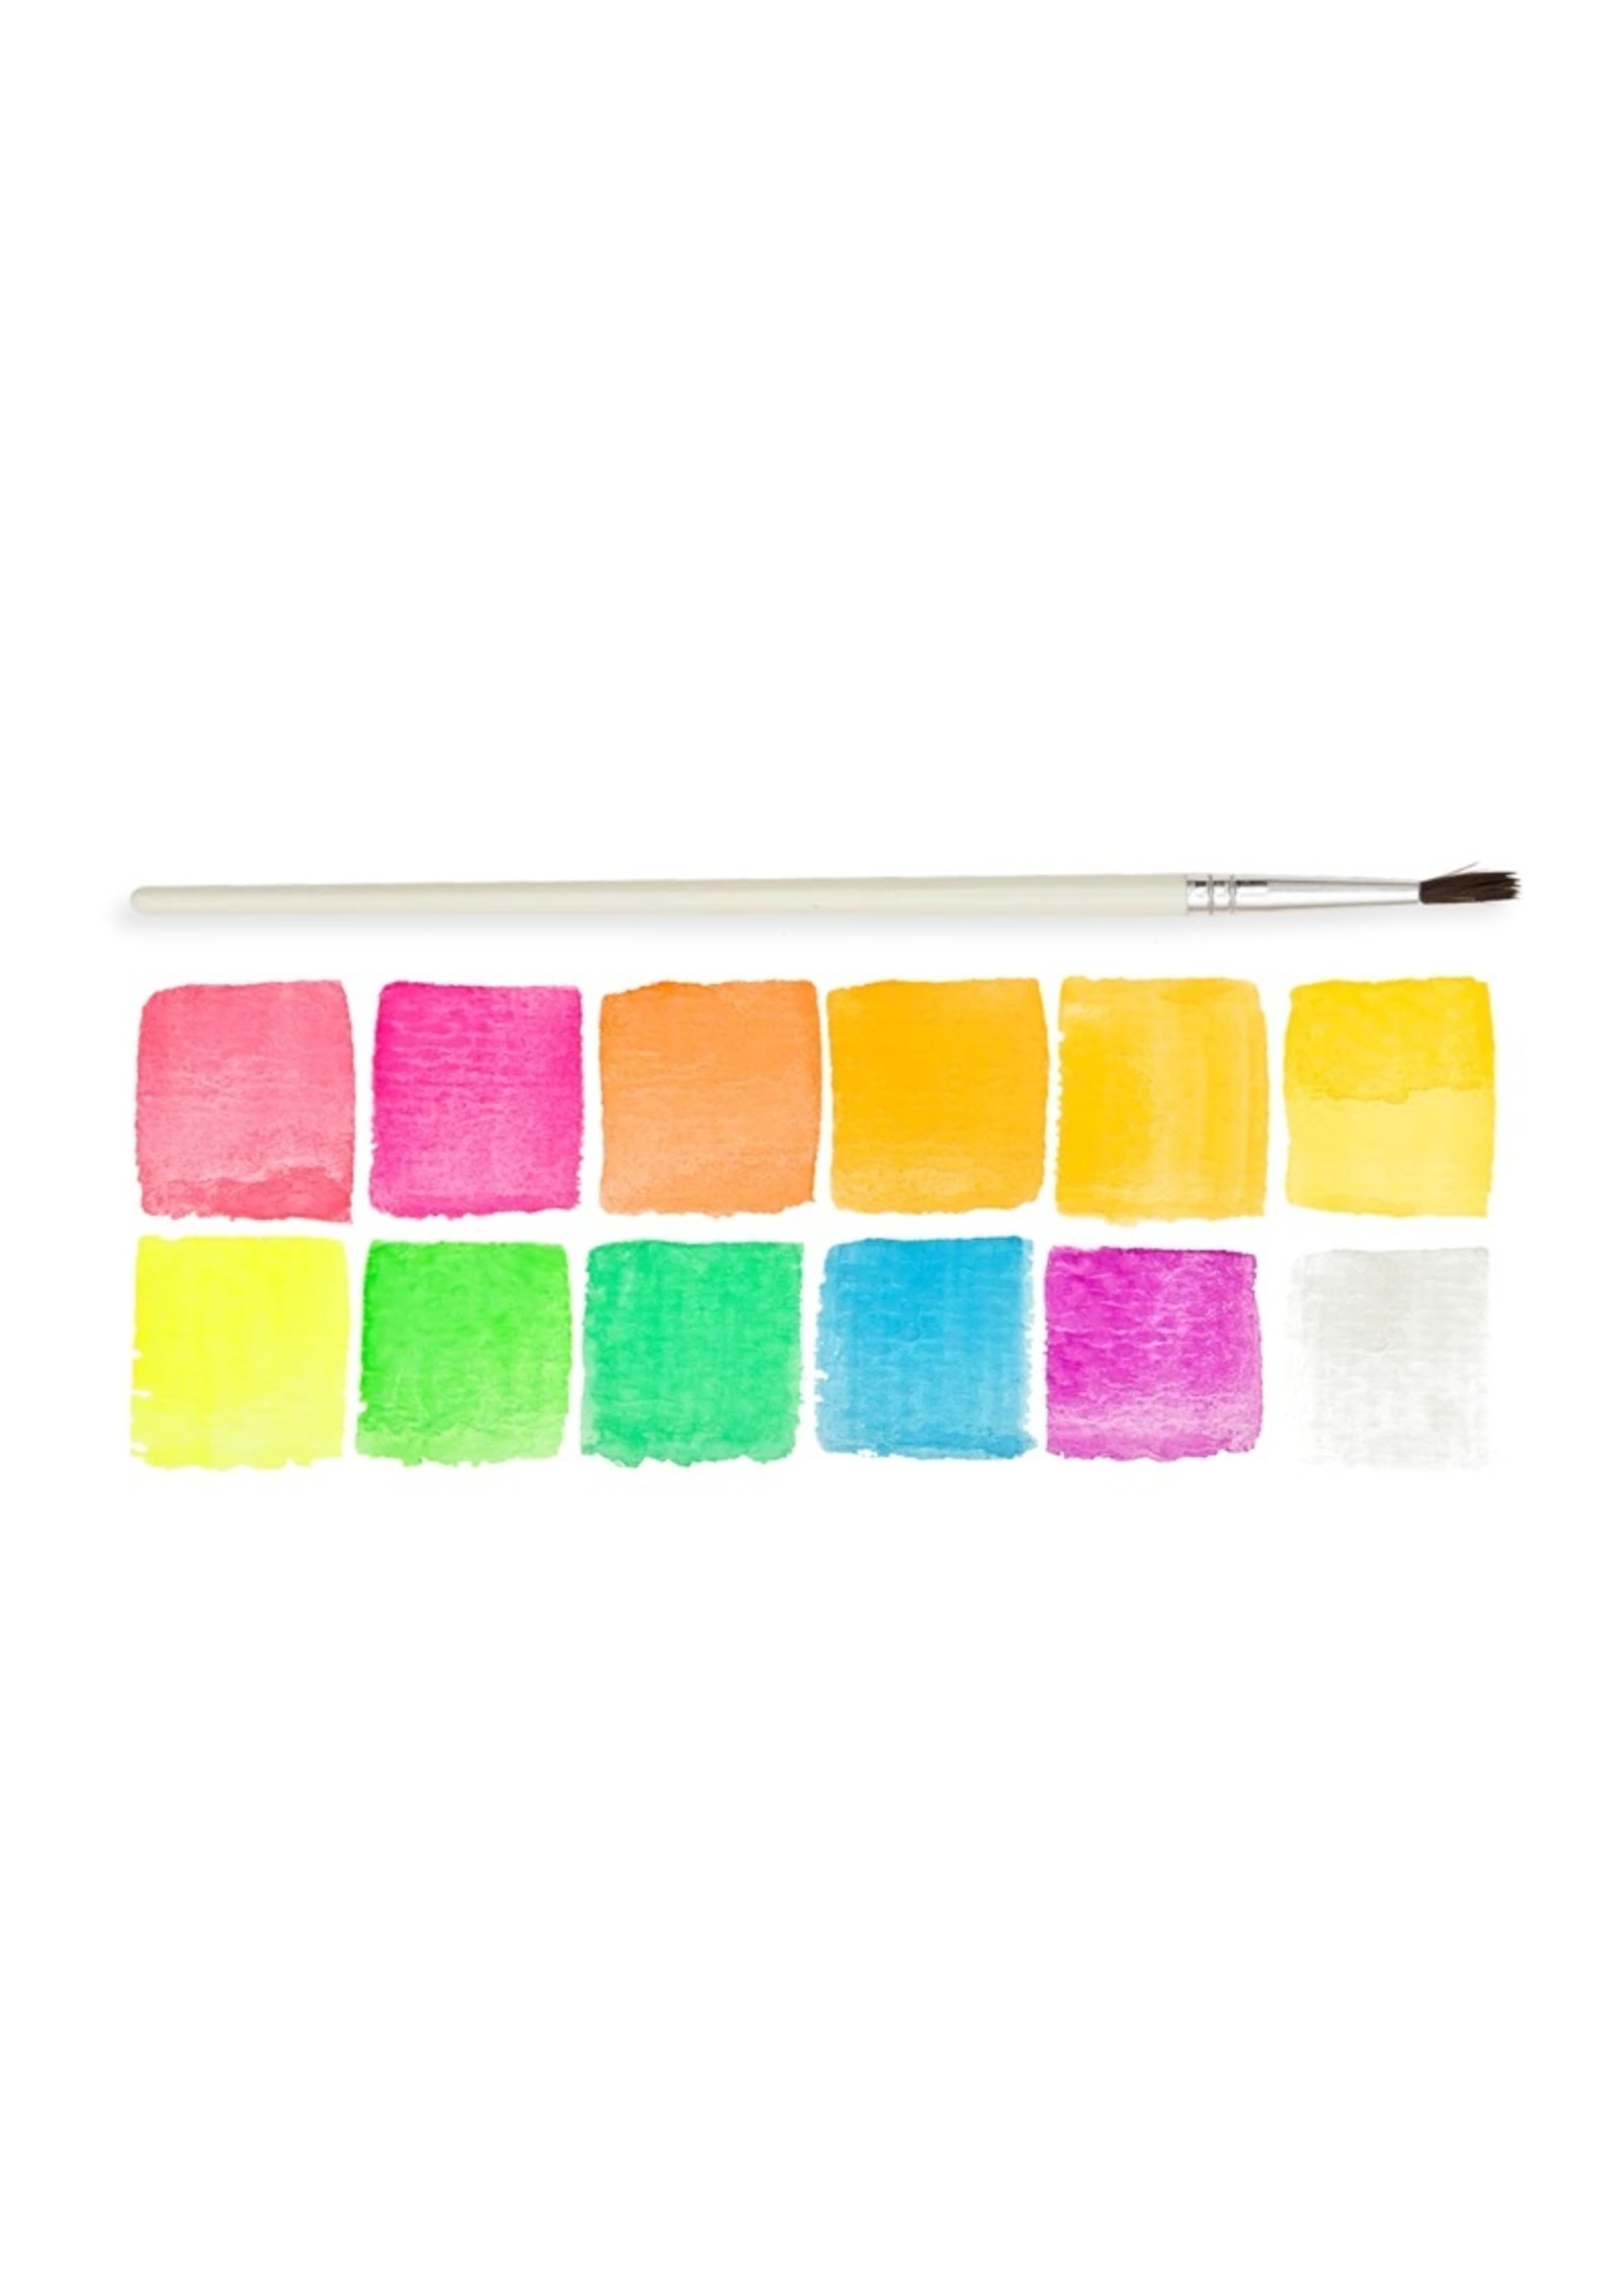 Ooly - Chroma Blends Watercolor Paint Set - Neon - Hub Hobby